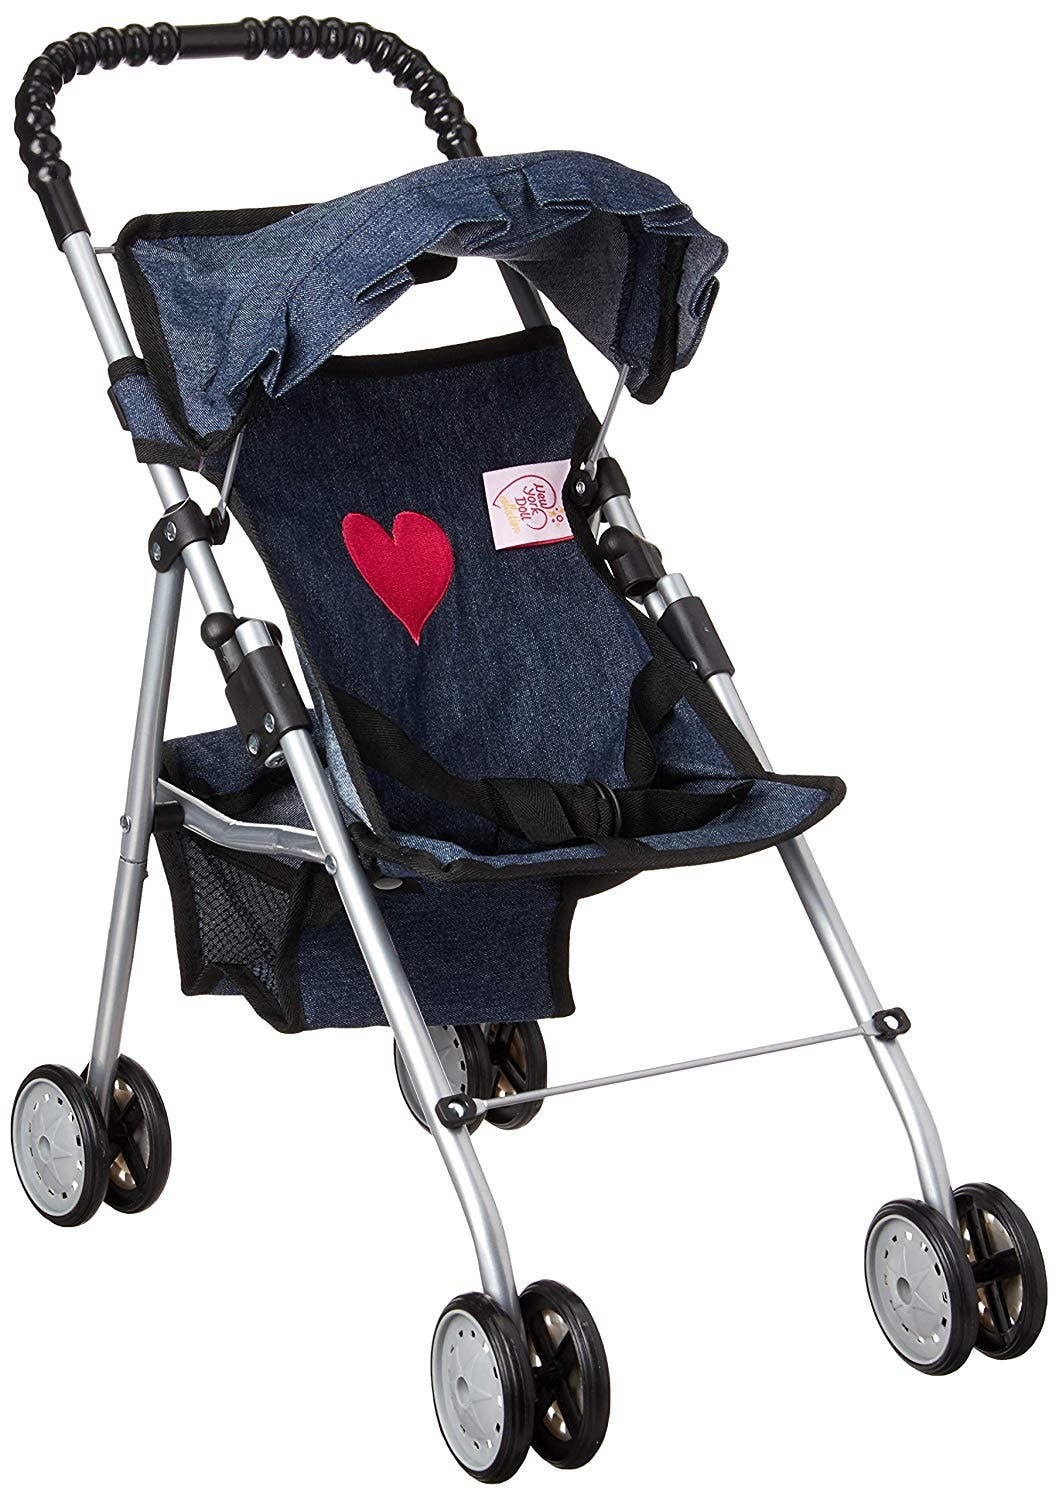 4 seat baby doll stroller